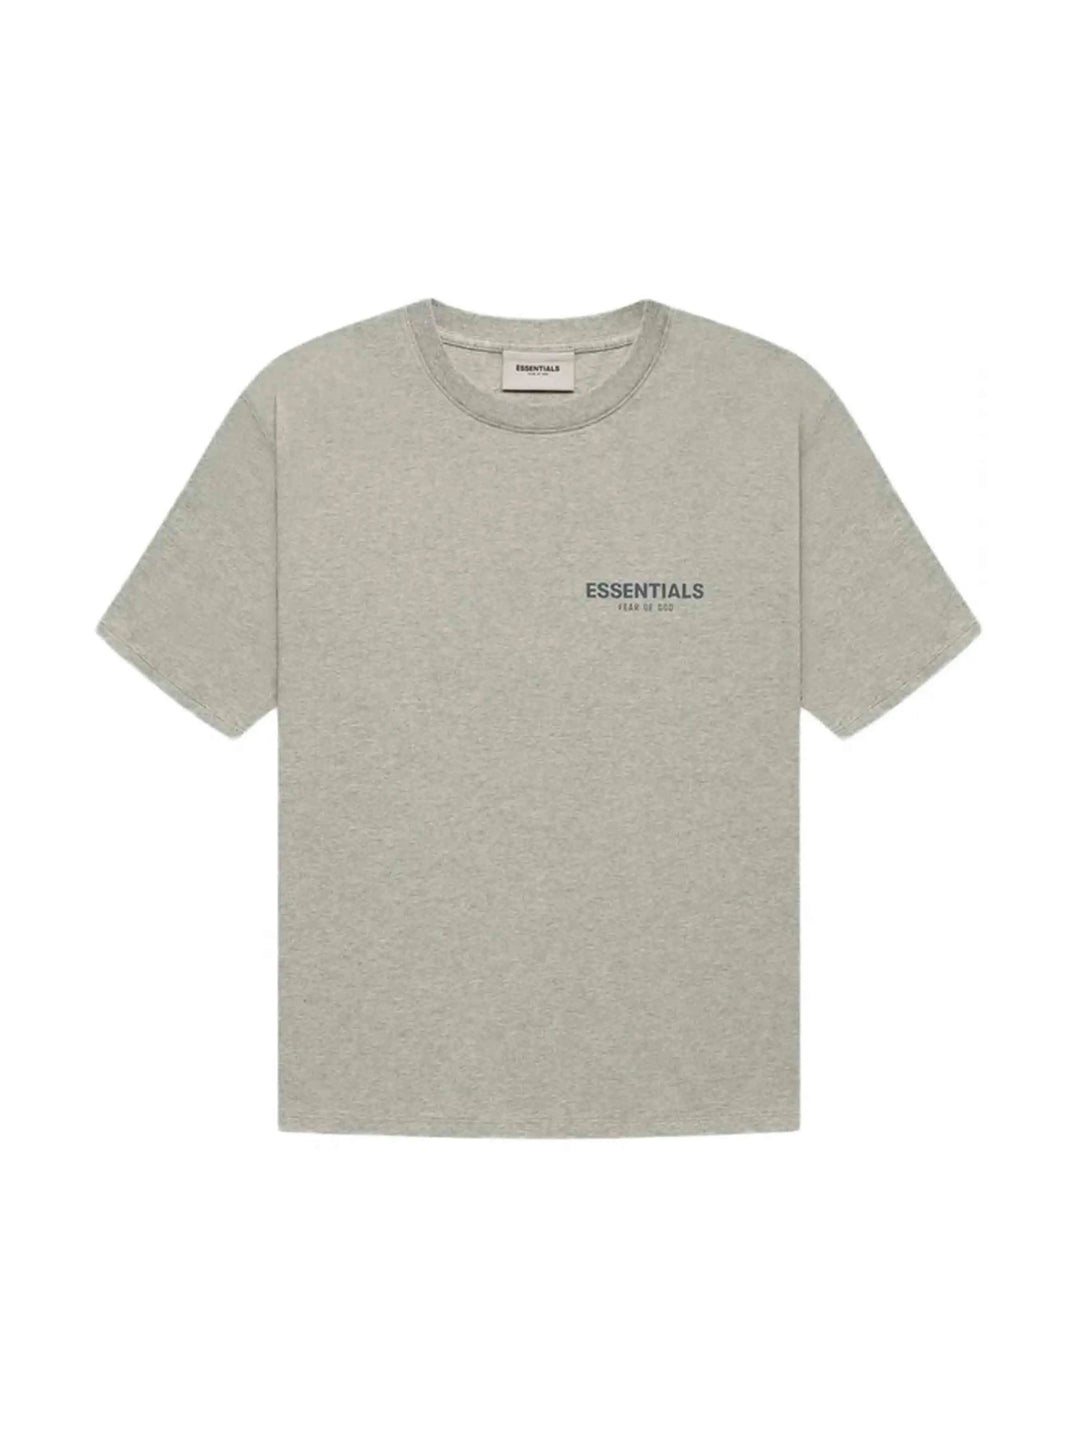 Fear of God Essentials Core Collection T-shirt Dark Heather Oatmeal - Prior